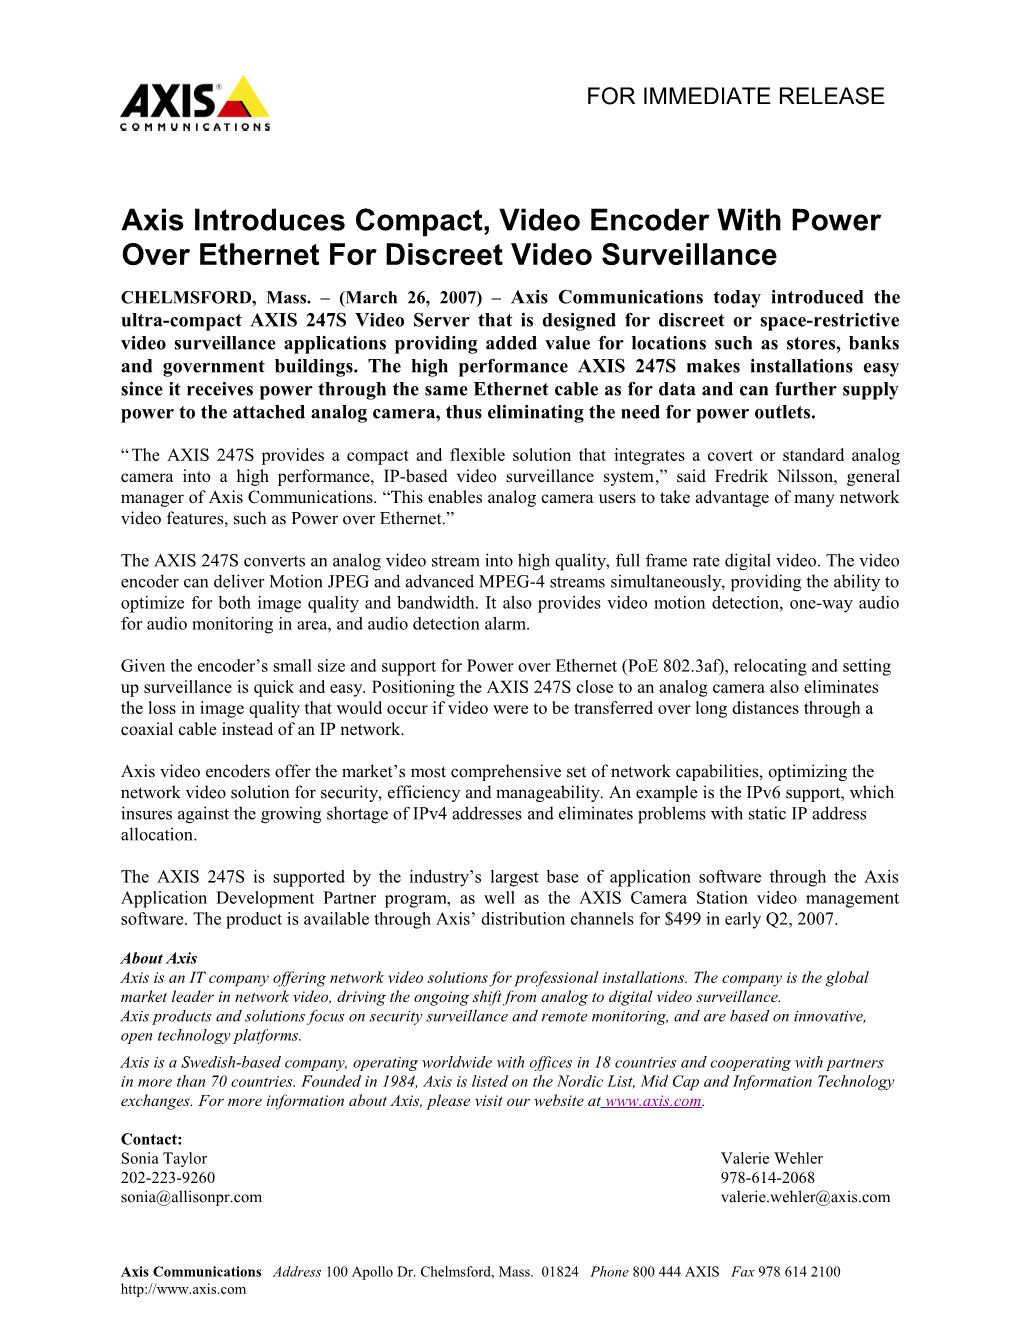 CHELMSFORD, Mass. (March 26, 2007) Axis Communications Today Introduced the Ultra-Compact